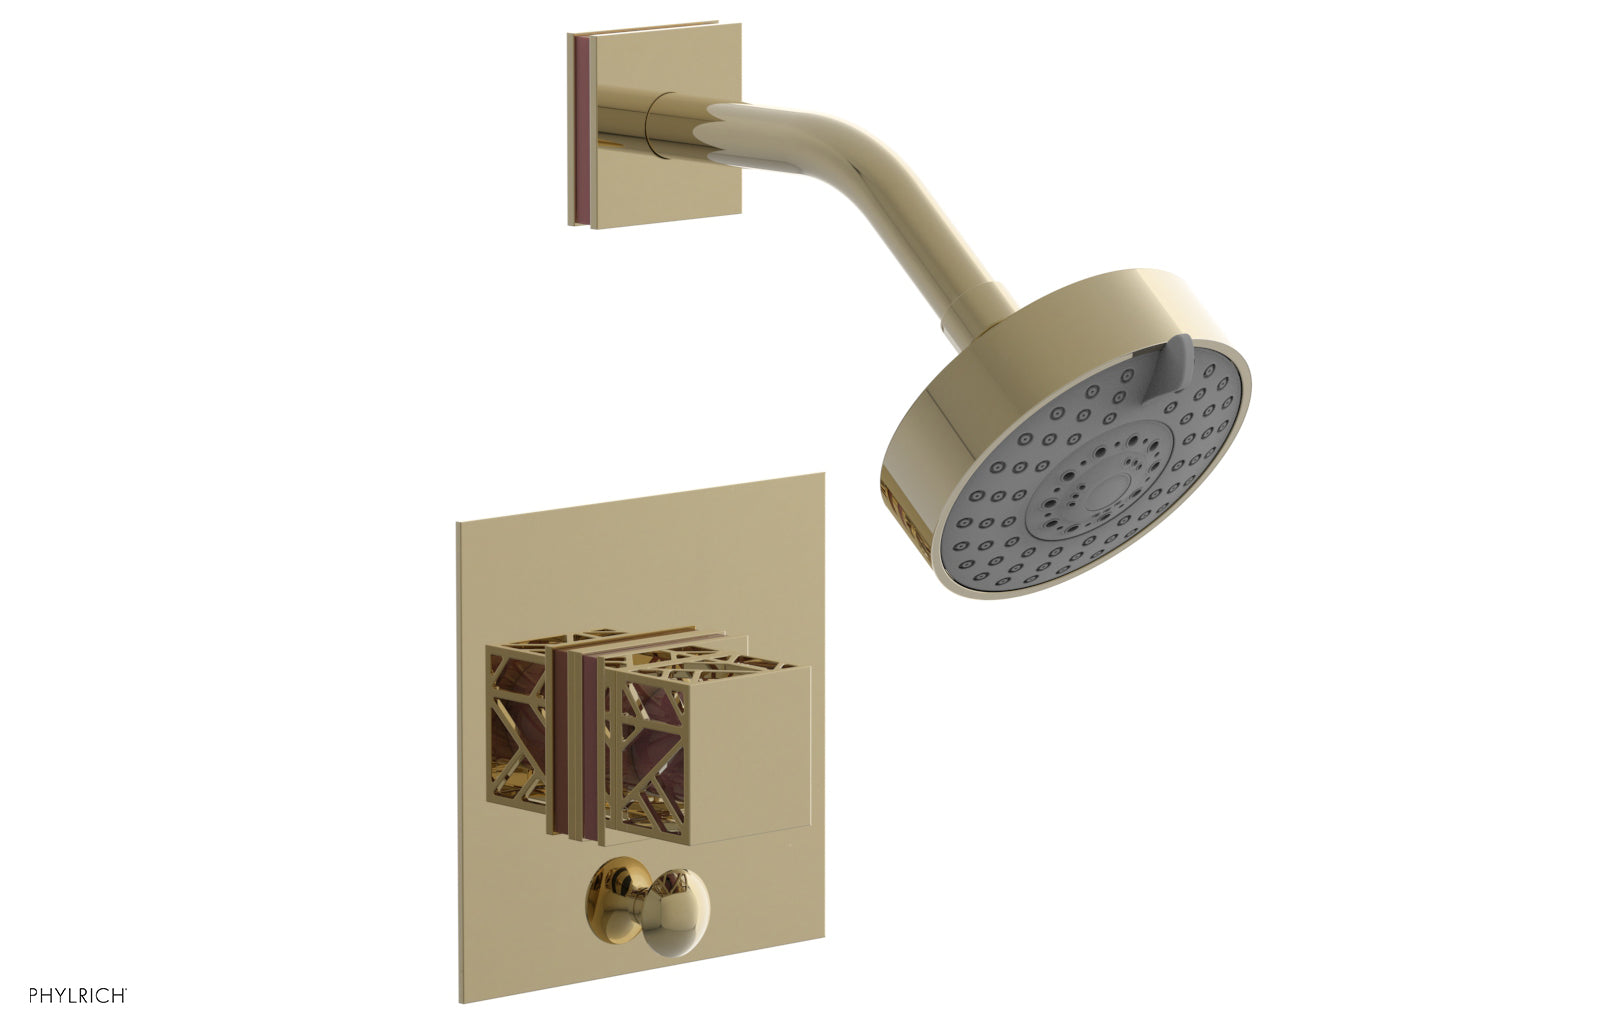 Phylrich JOLIE Pressure Balance Shower and Diverter Set (Less Spout), Square Handle with "Purple" Accents